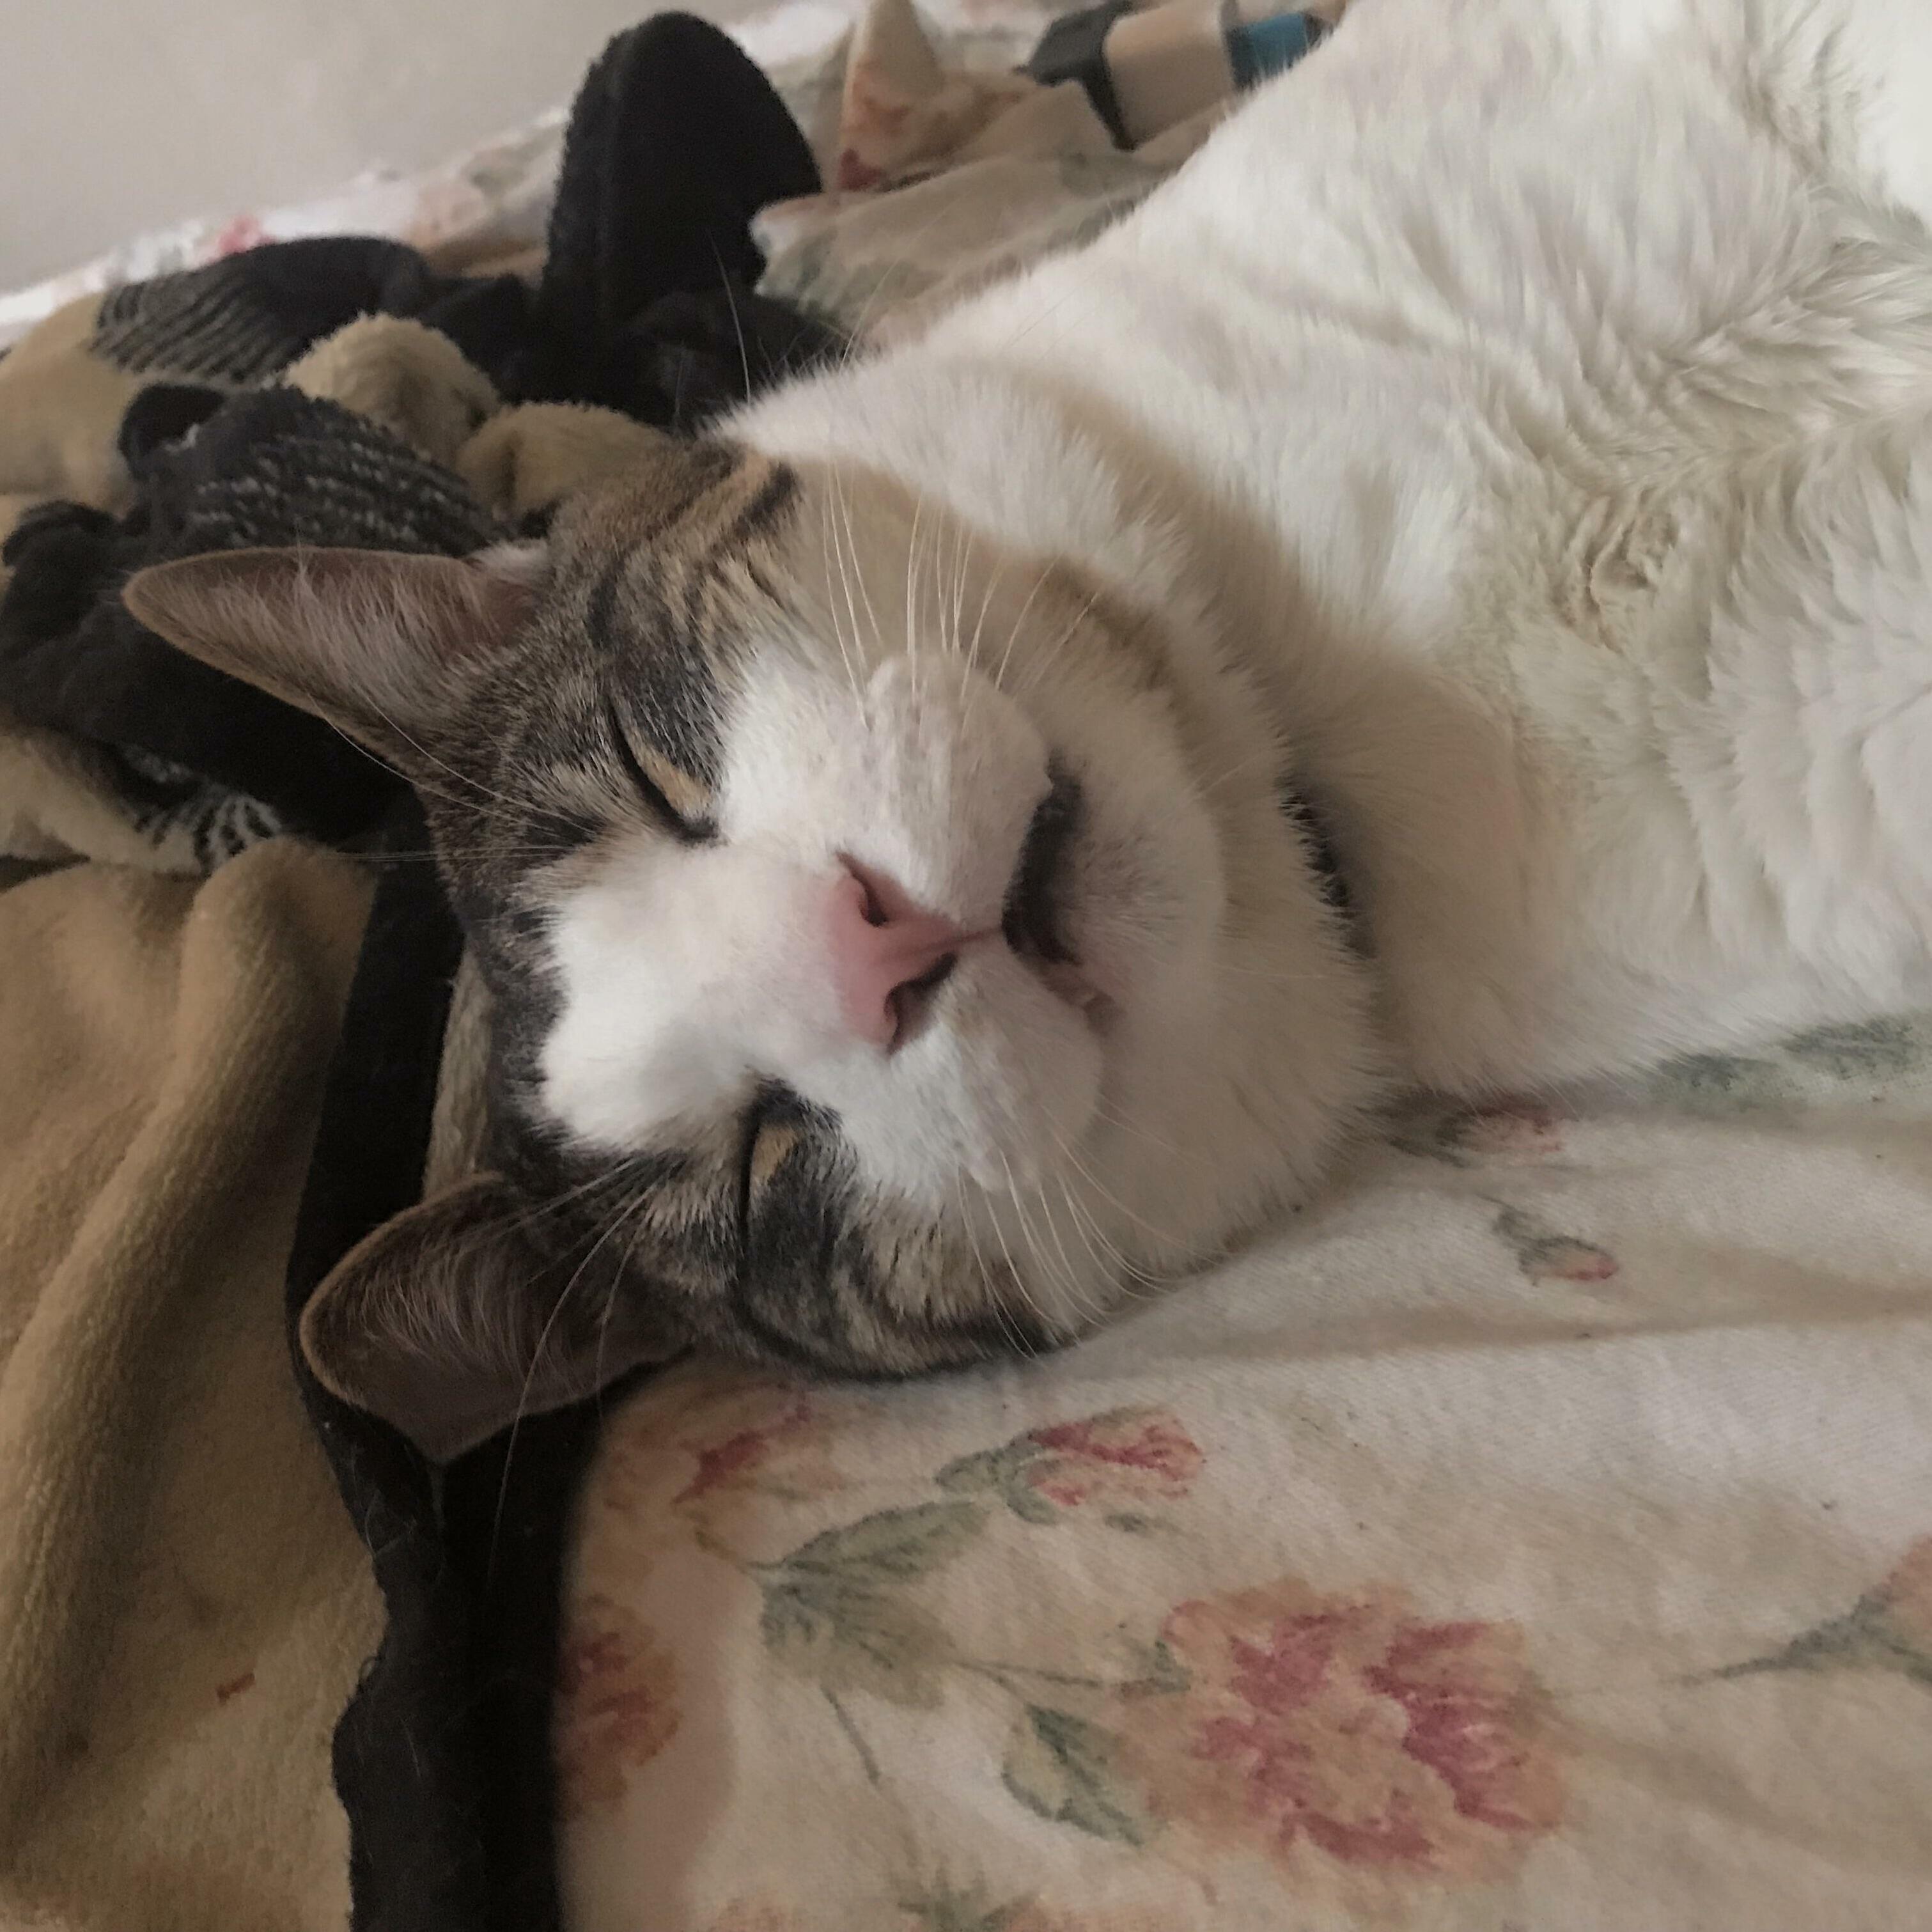 Milk, my shelter baby, used to be a stray who was aggressive. now he is the sweetest, happiest boy. he even smiles in his sleep!